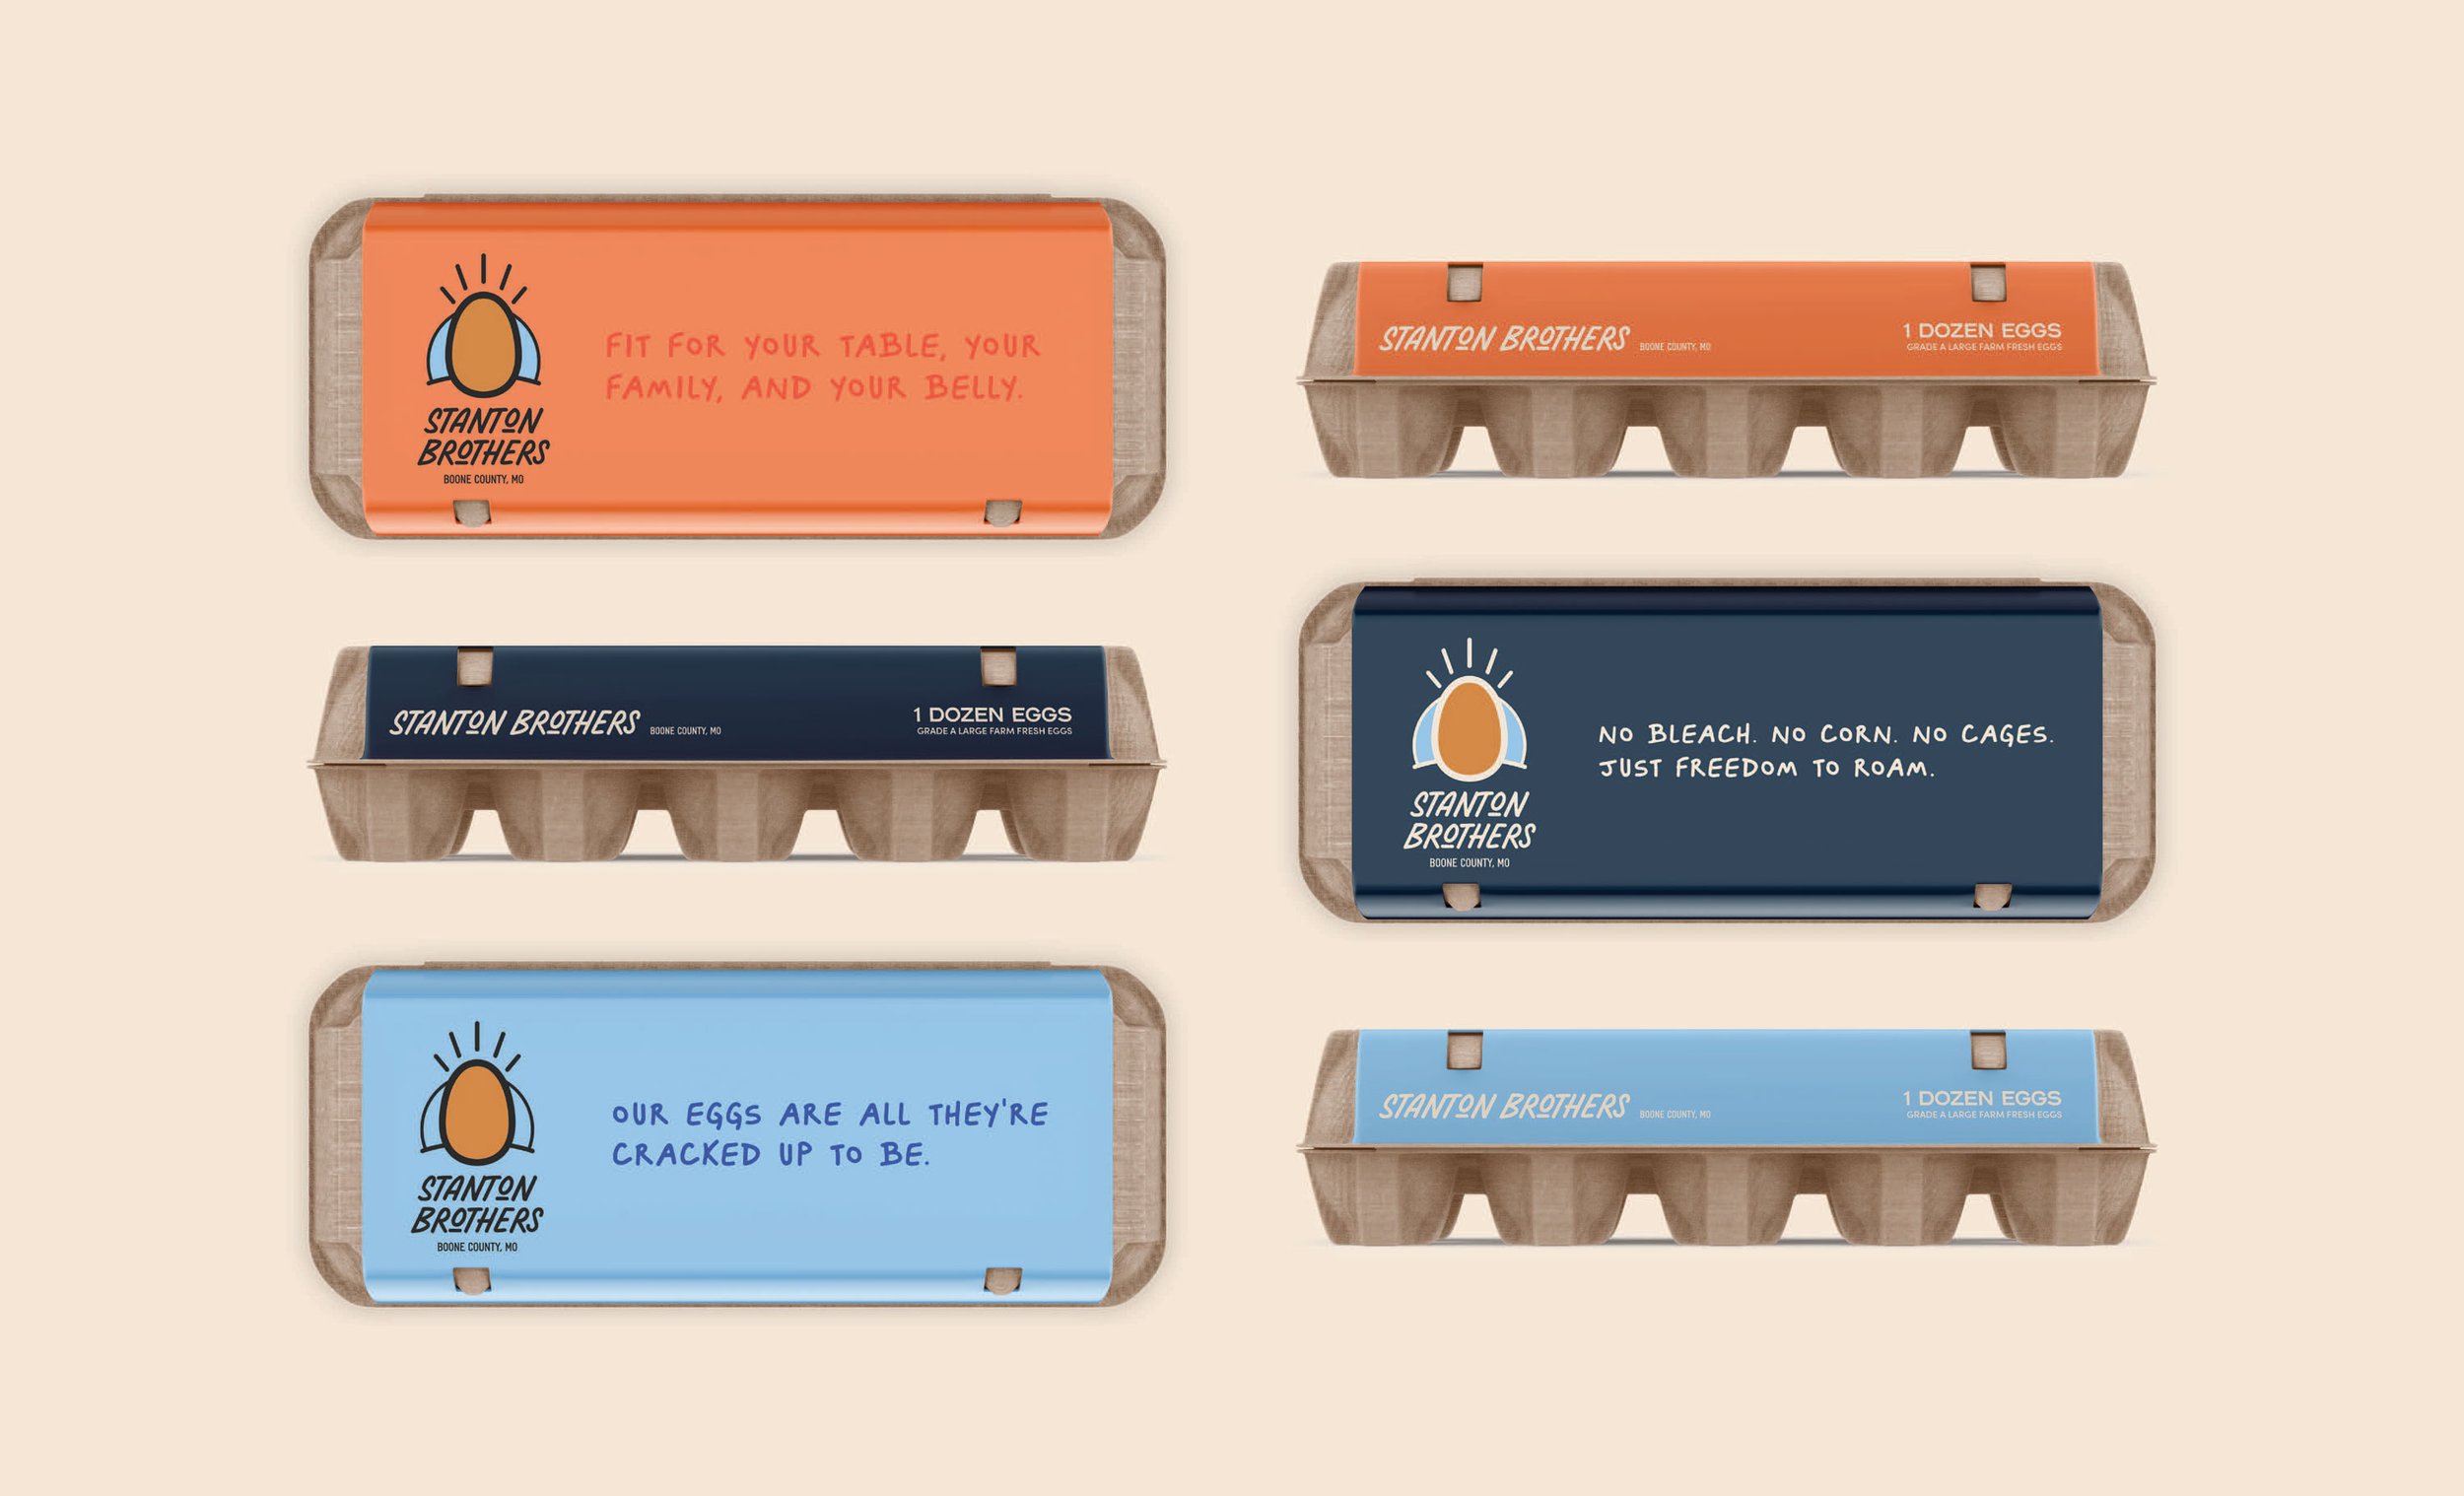  Stanton Brothers egg carton mock-ups with new logo and colors. 